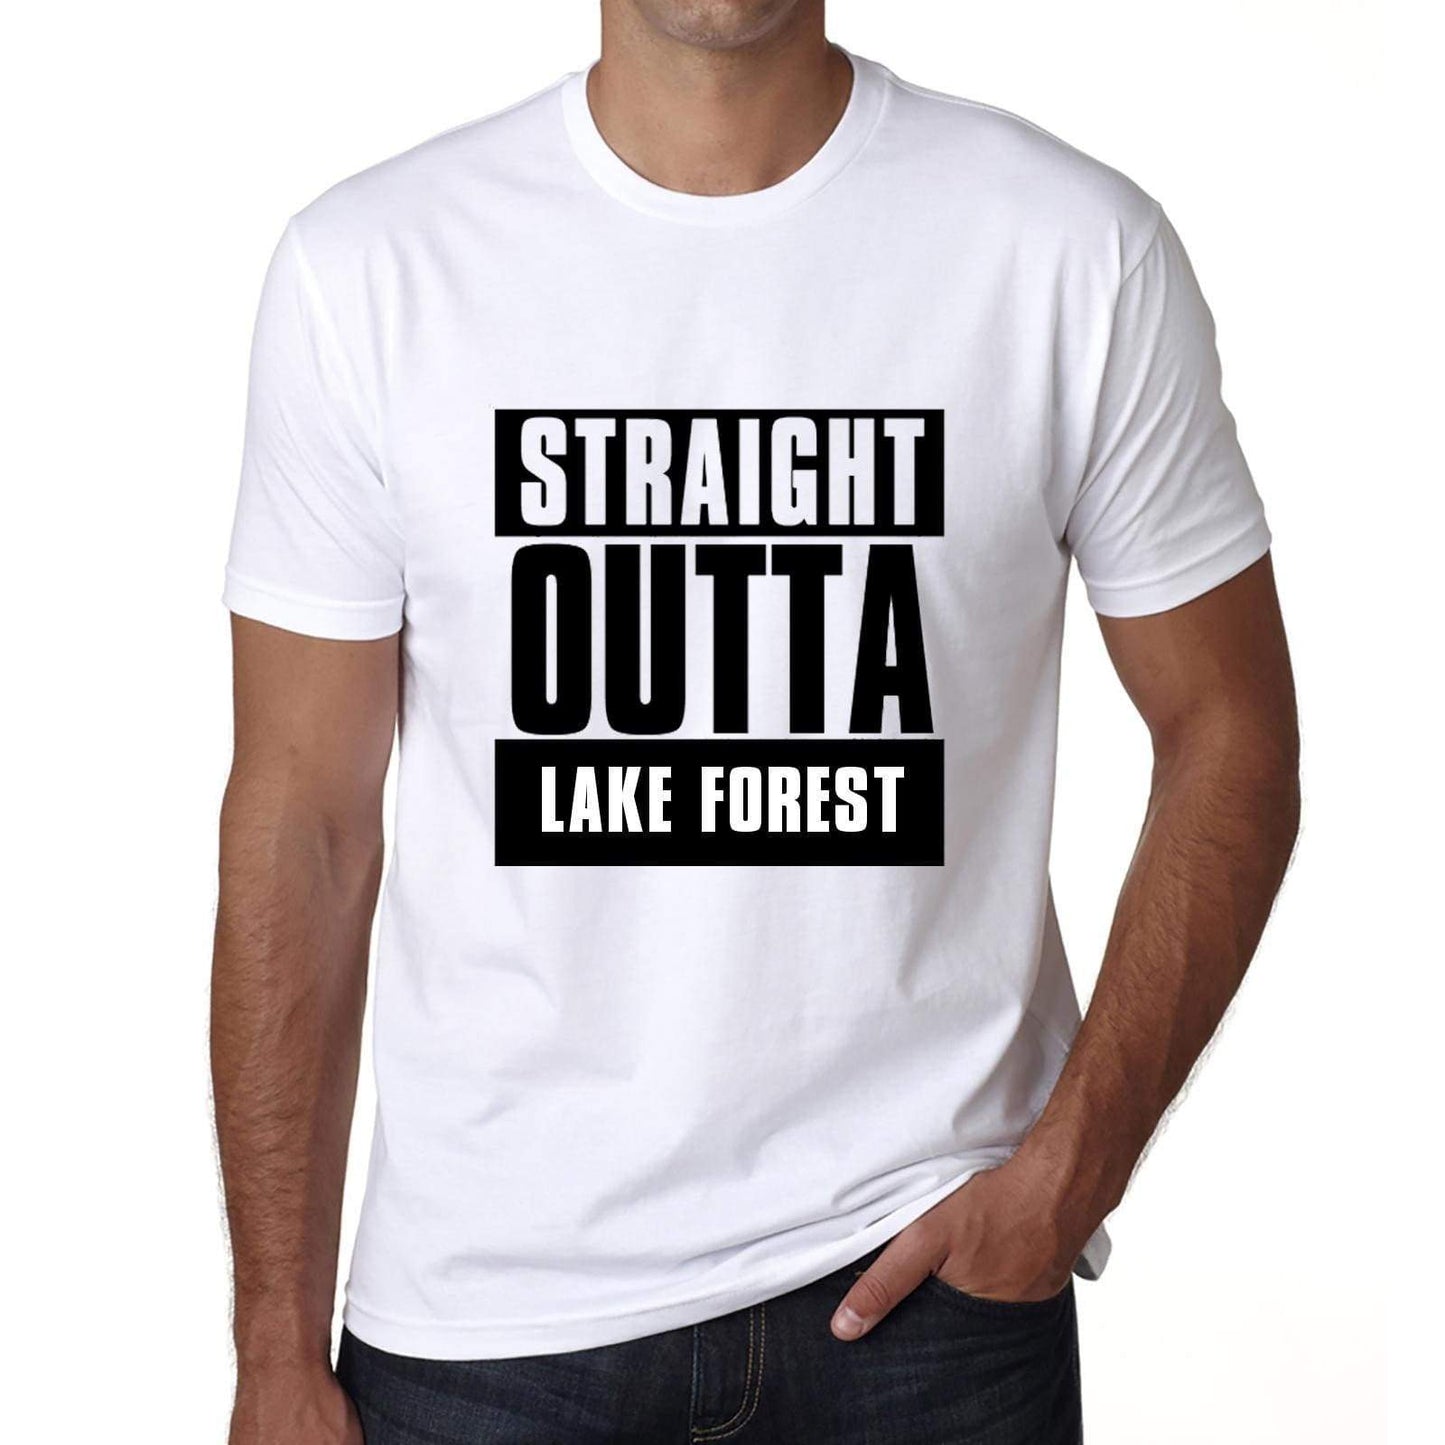 Straight Outta Lake Forest Mens Short Sleeve Round Neck T-Shirt 00027 - White / S - Casual